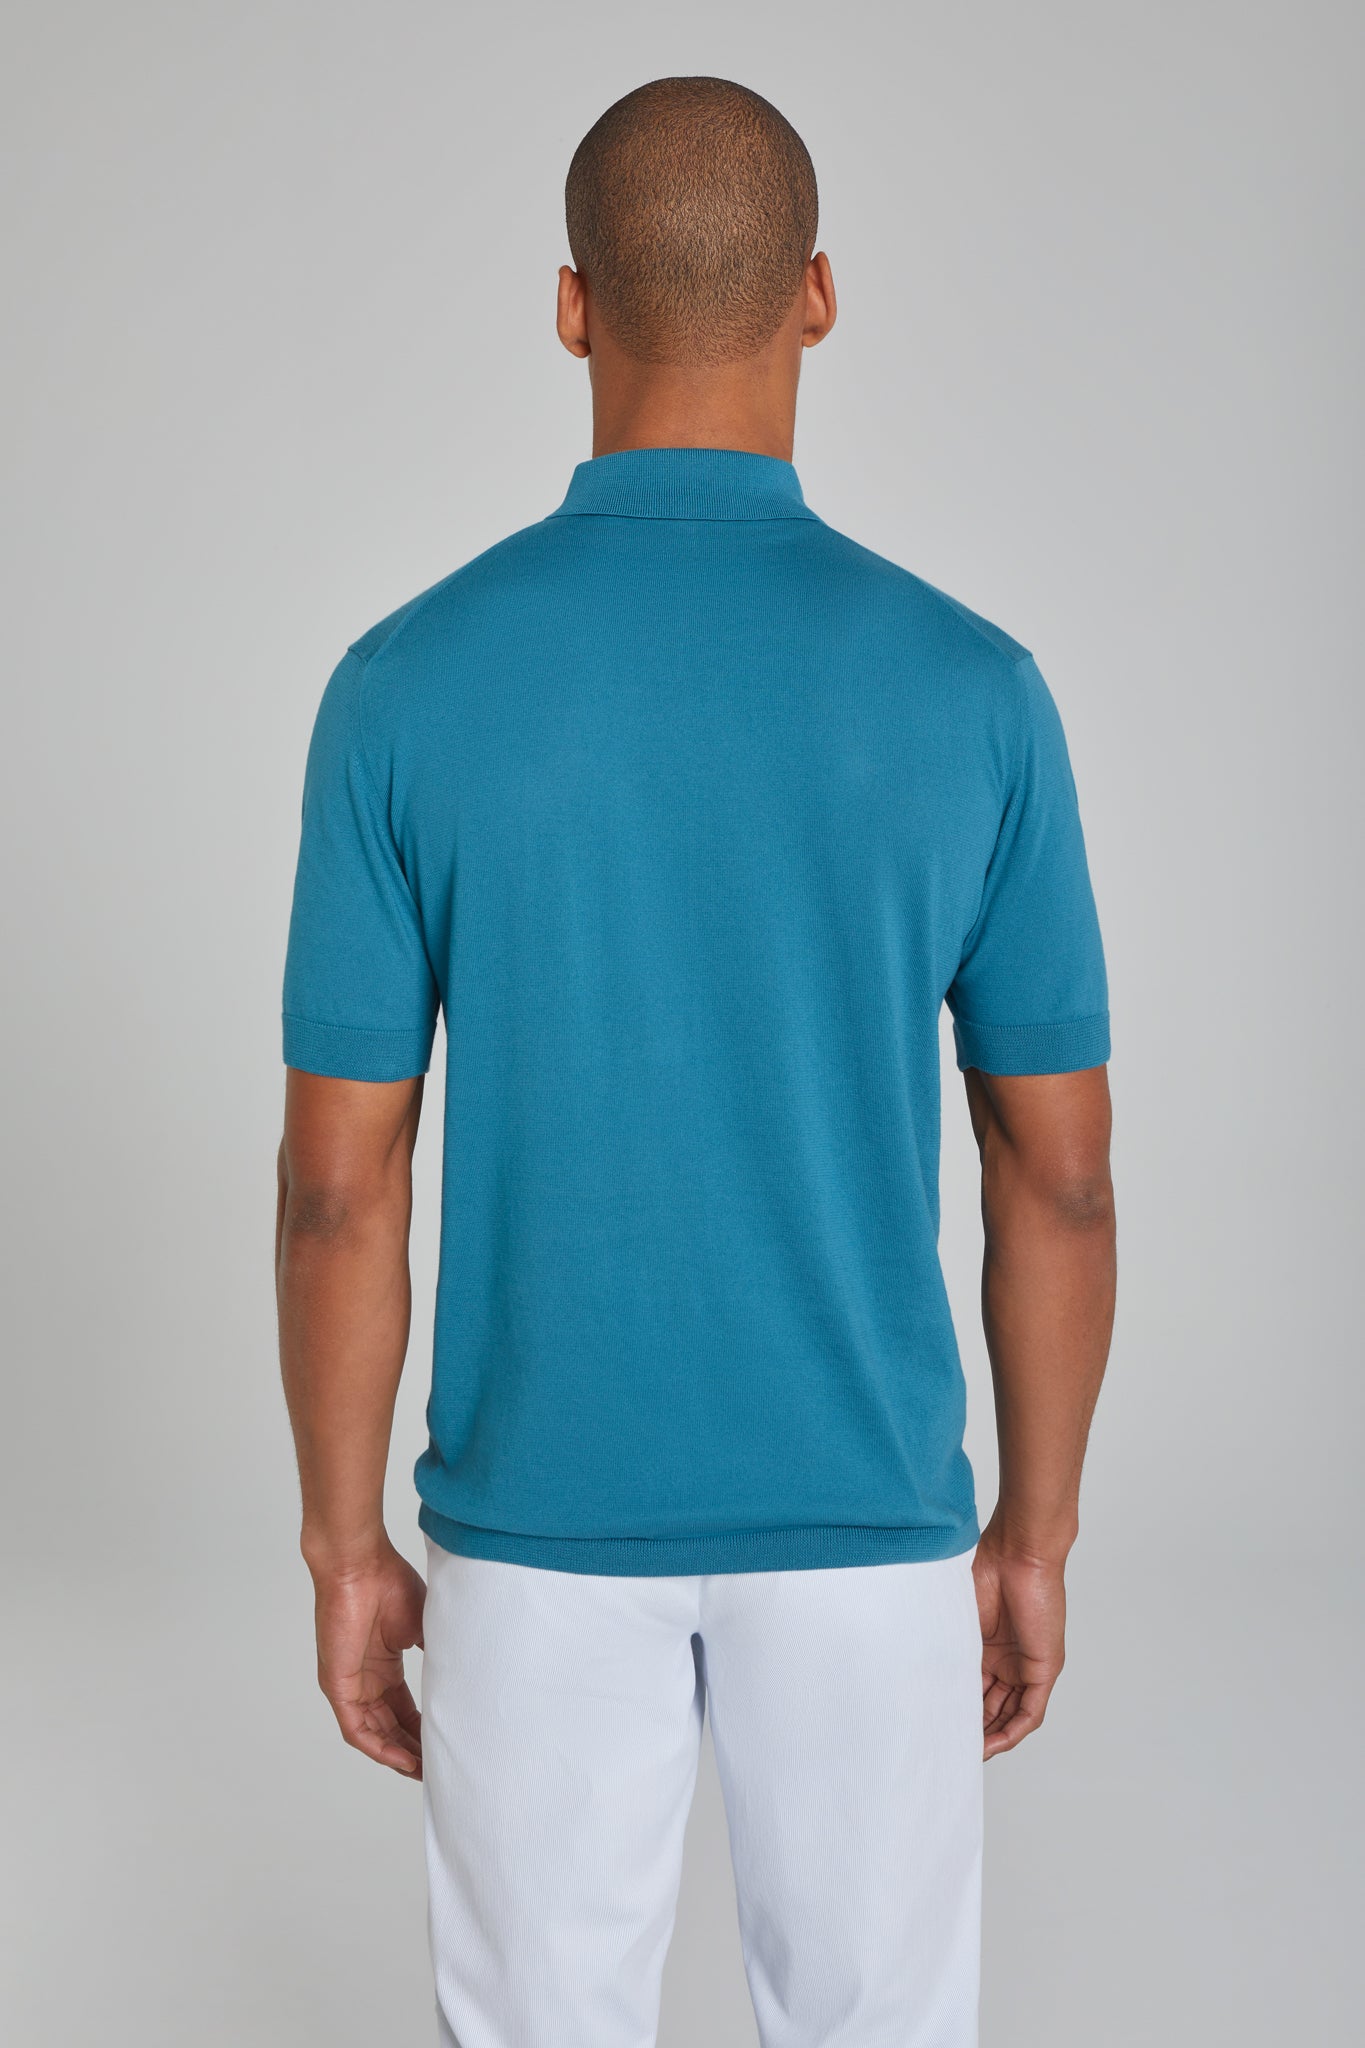 Teal Roslyn Cotton Knit Polo-SS Polo-Jack Victor